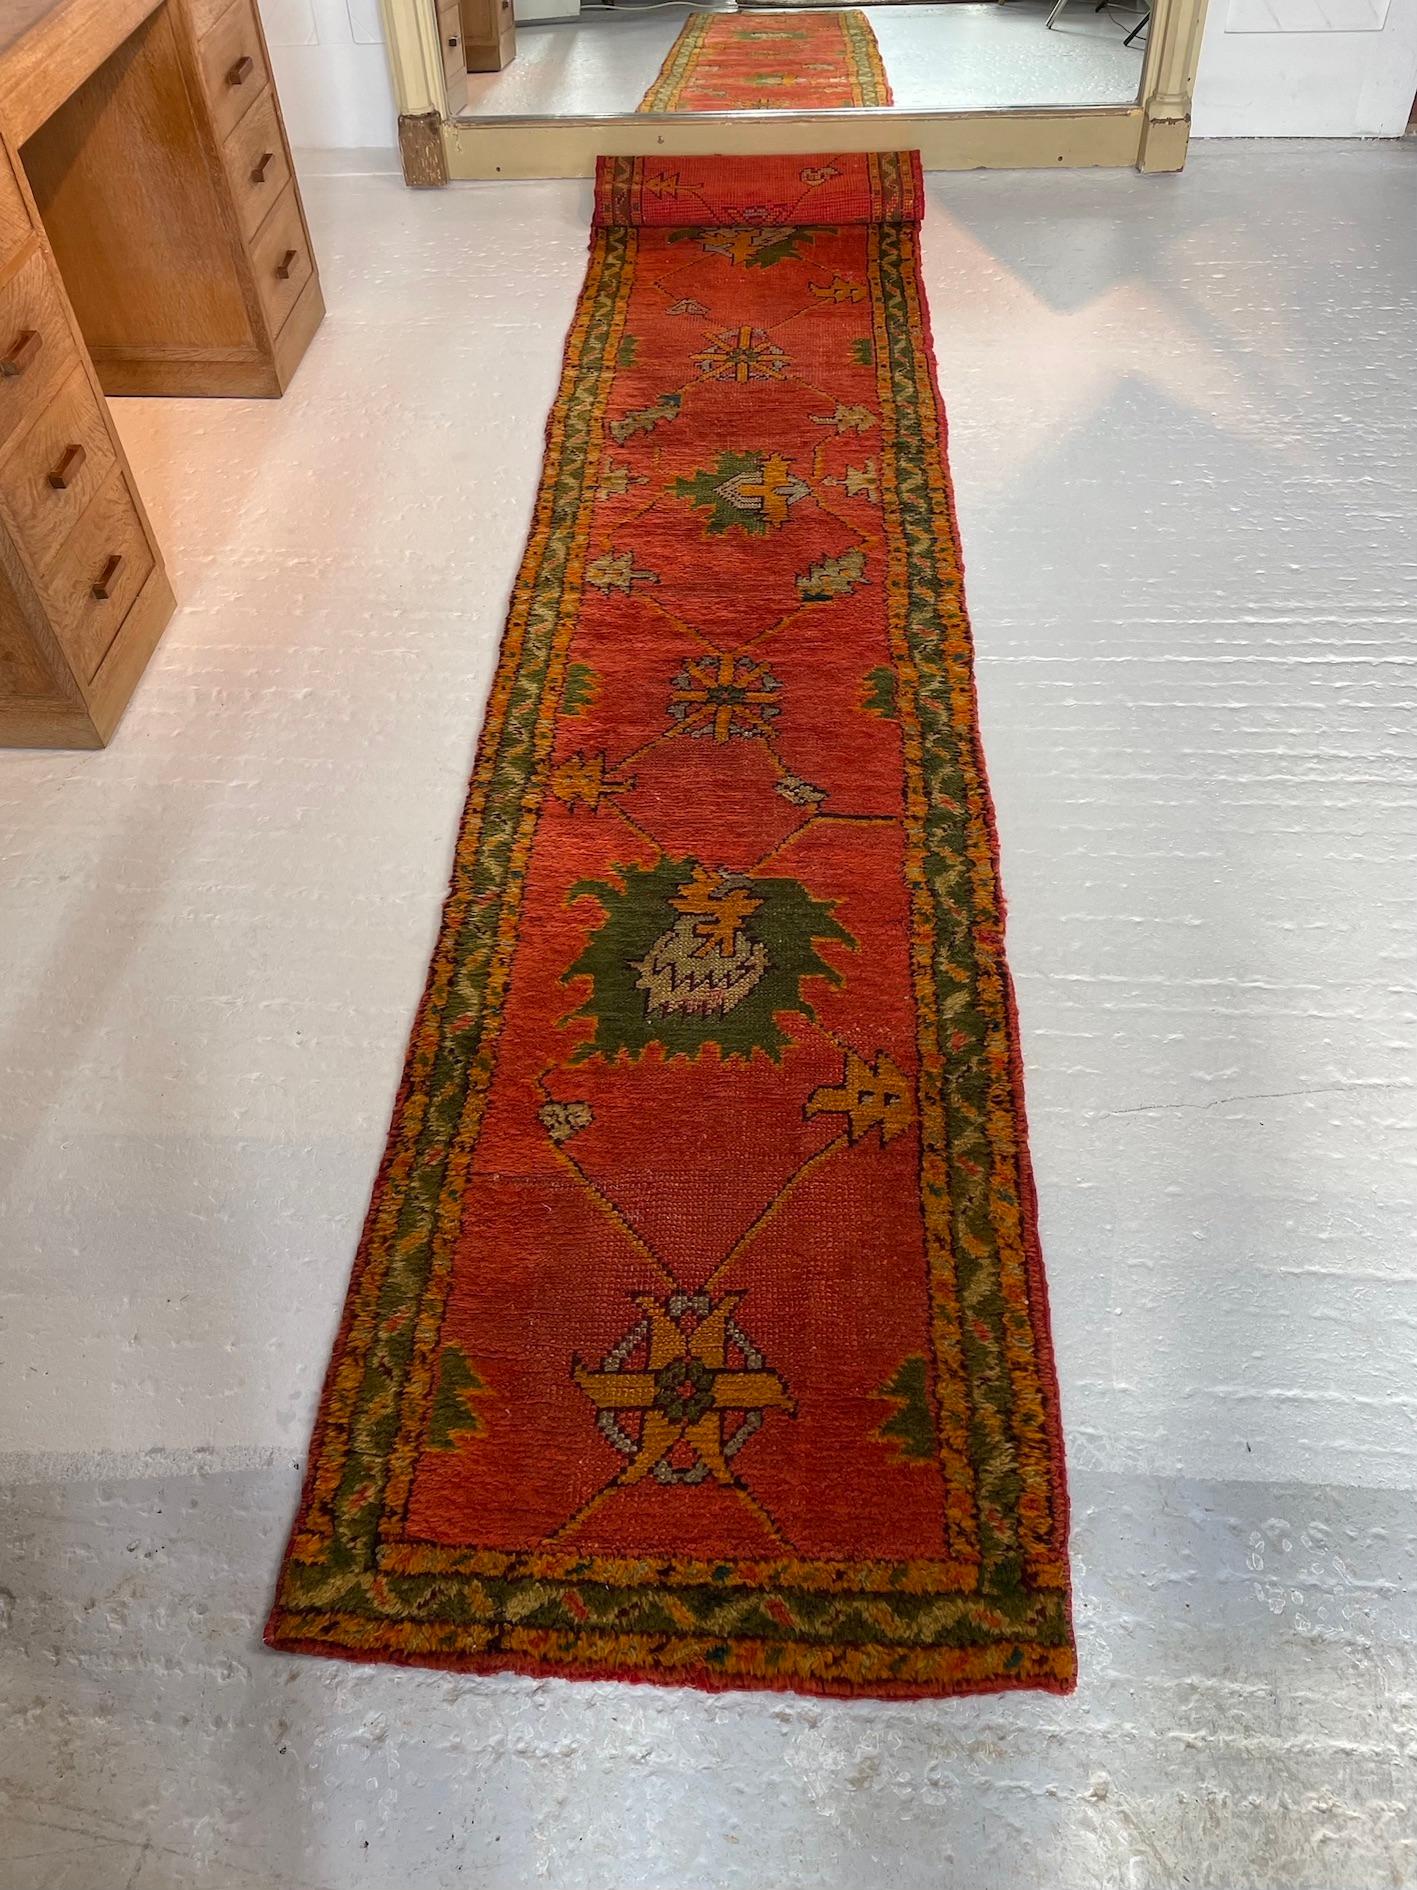 An original Arts & Crafts runner with red field depicting a stylised multi-colour floral design
Donegal weave designed by Gavin Morton
circa 1900

Donegal Carpets was founded in 1898 by the Scottish textile manufacturer Alexander Morton. He had